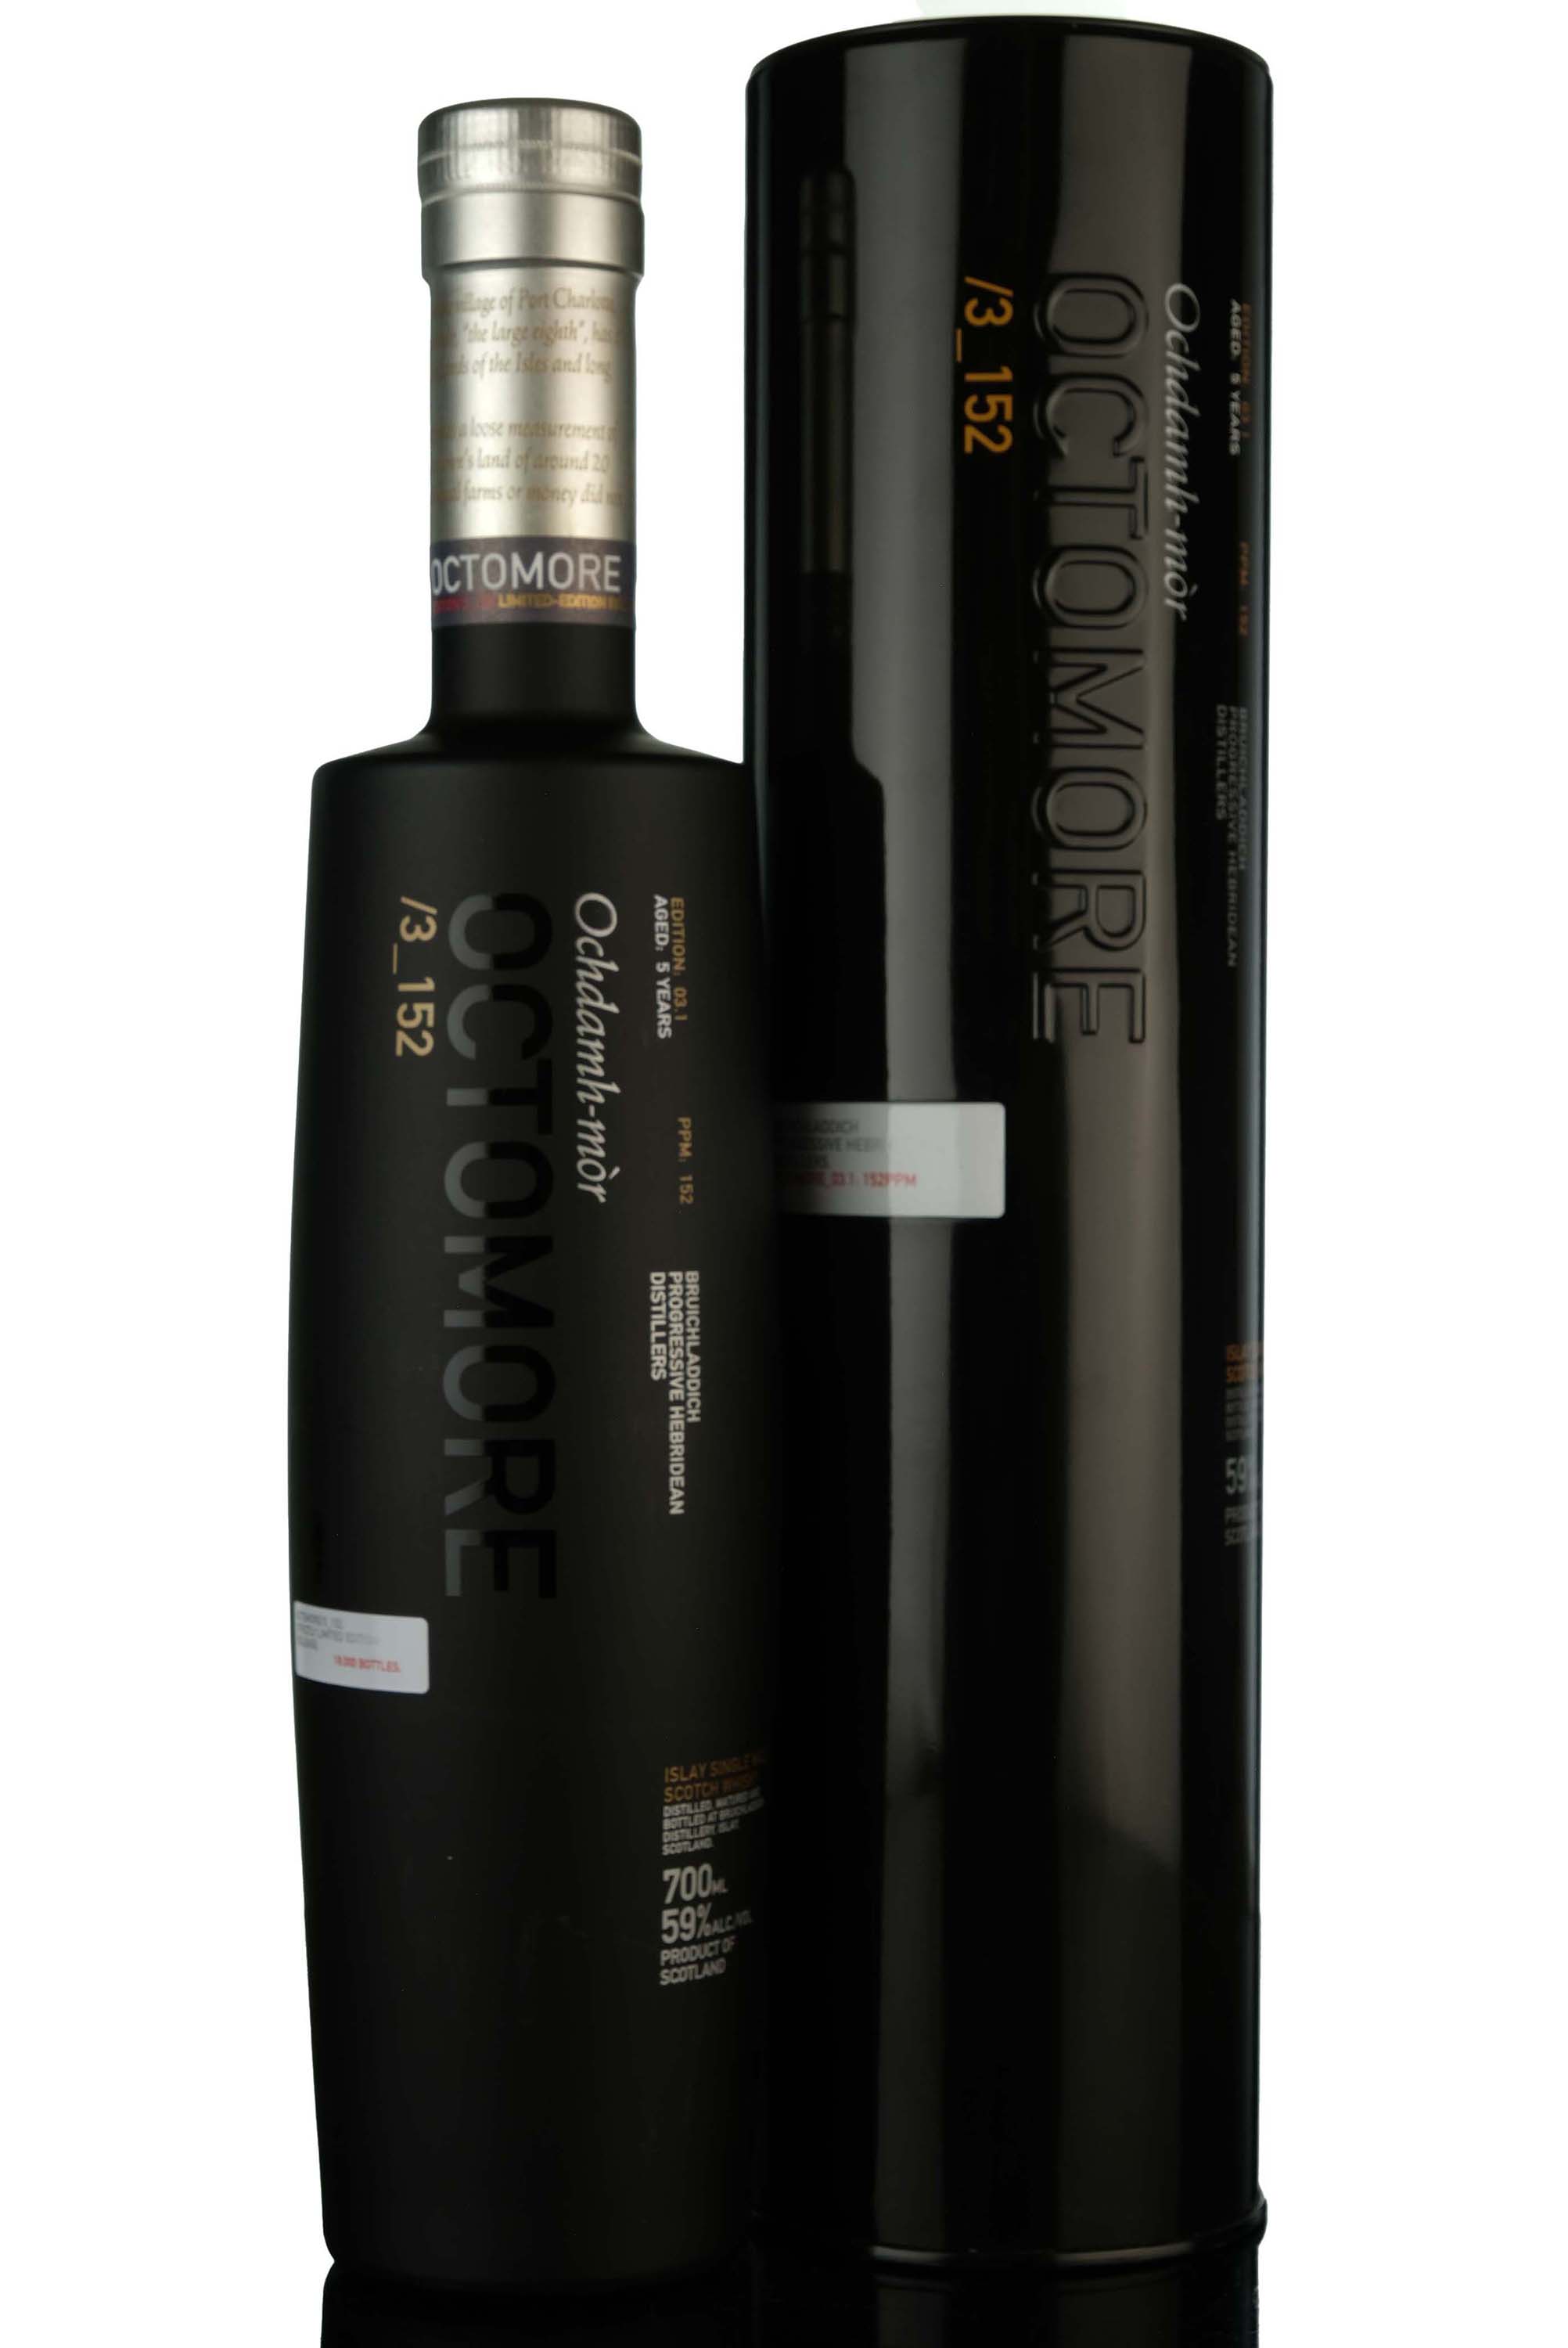 Octomore 5 Year Old - Edition 03.1 - 2010 Release